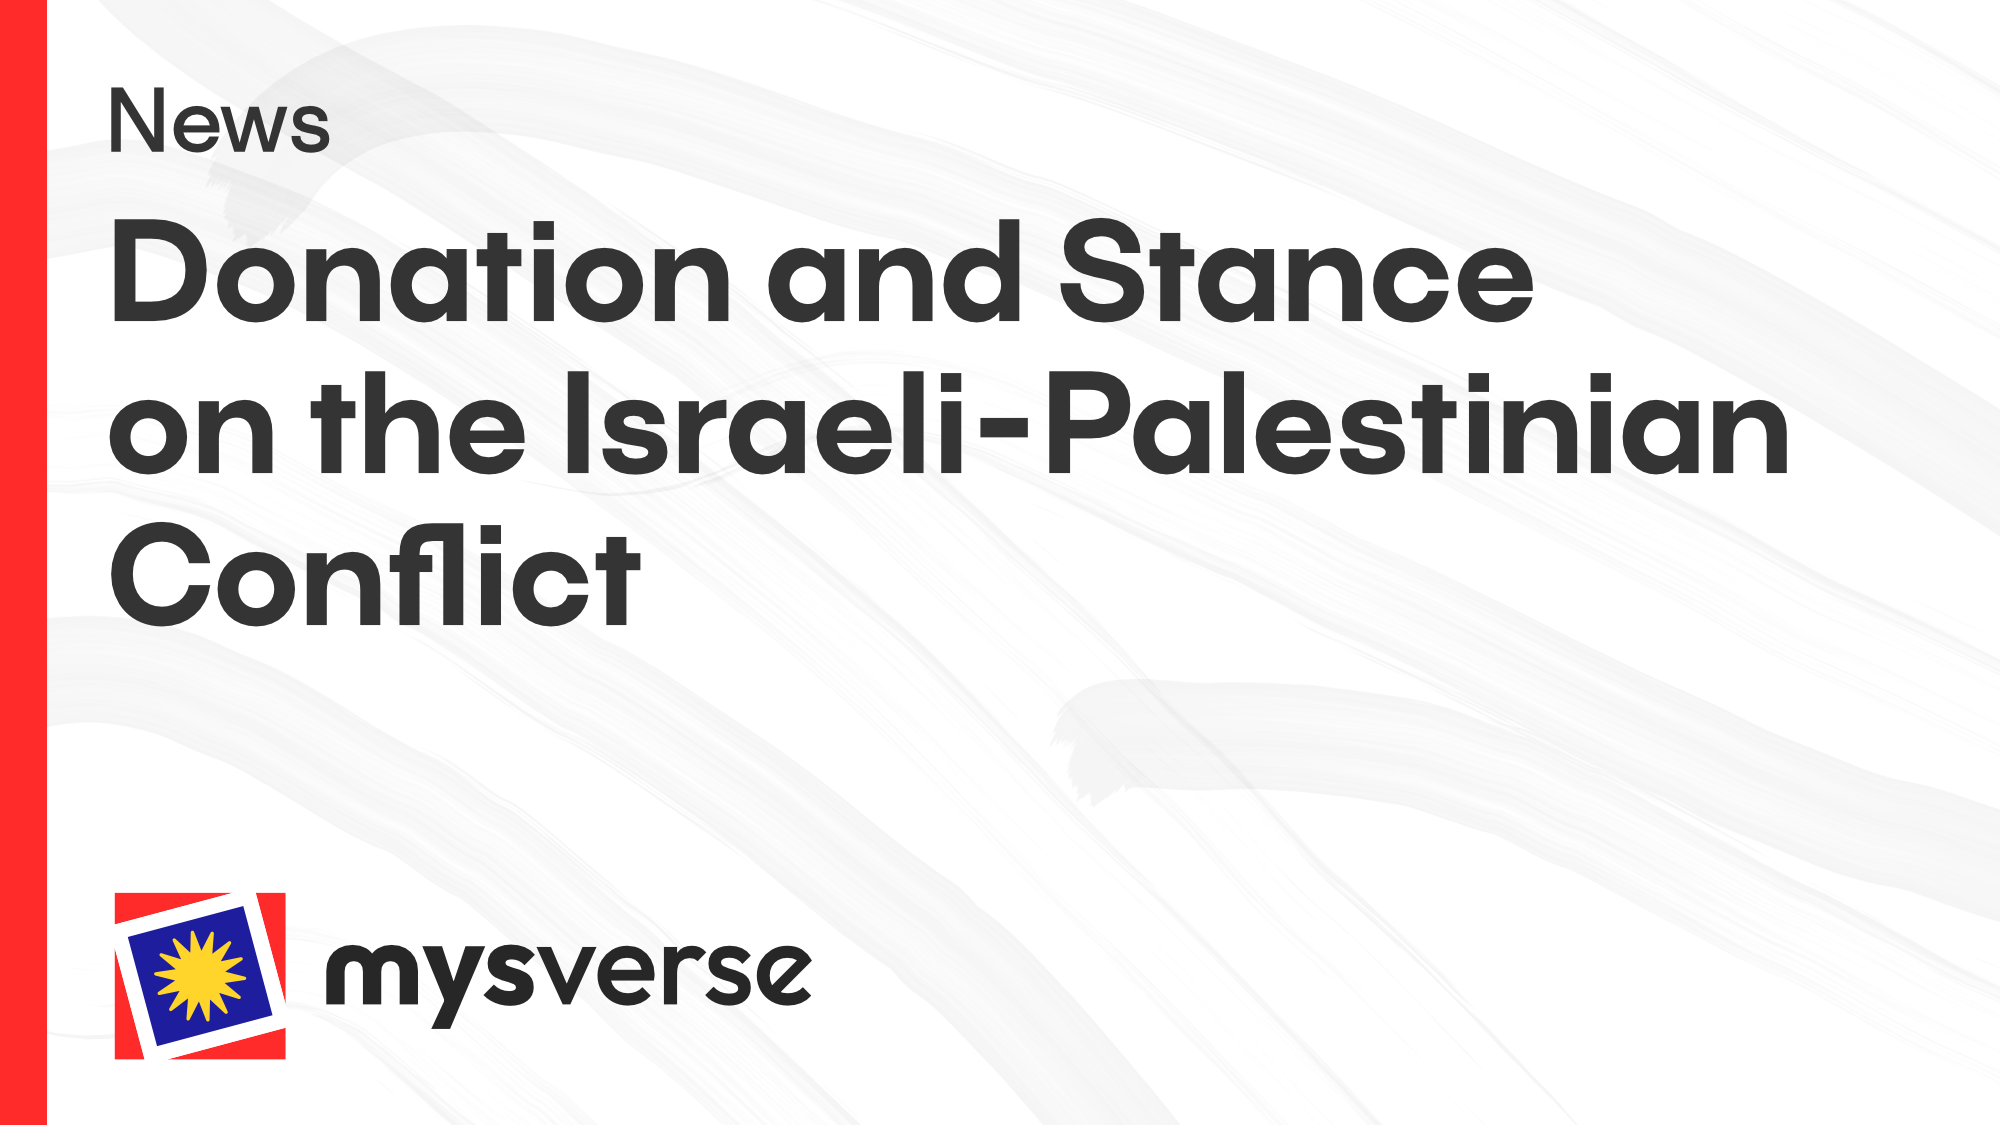 Donation and Stance on the Israeli-Palestinian Conflict